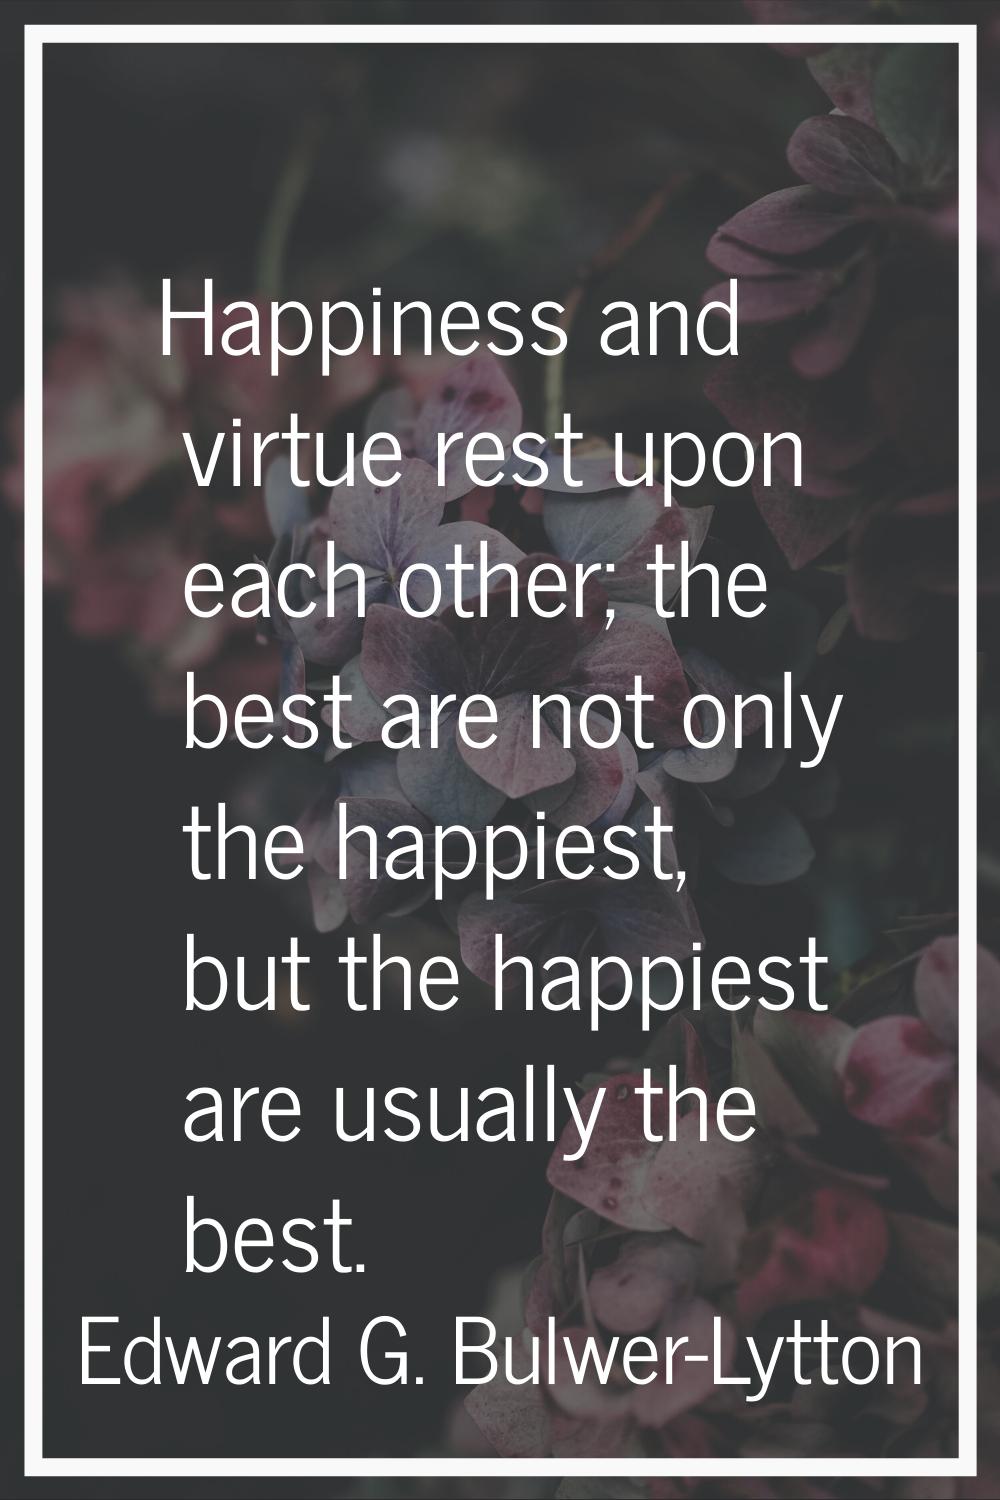 Happiness and virtue rest upon each other; the best are not only the happiest, but the happiest are